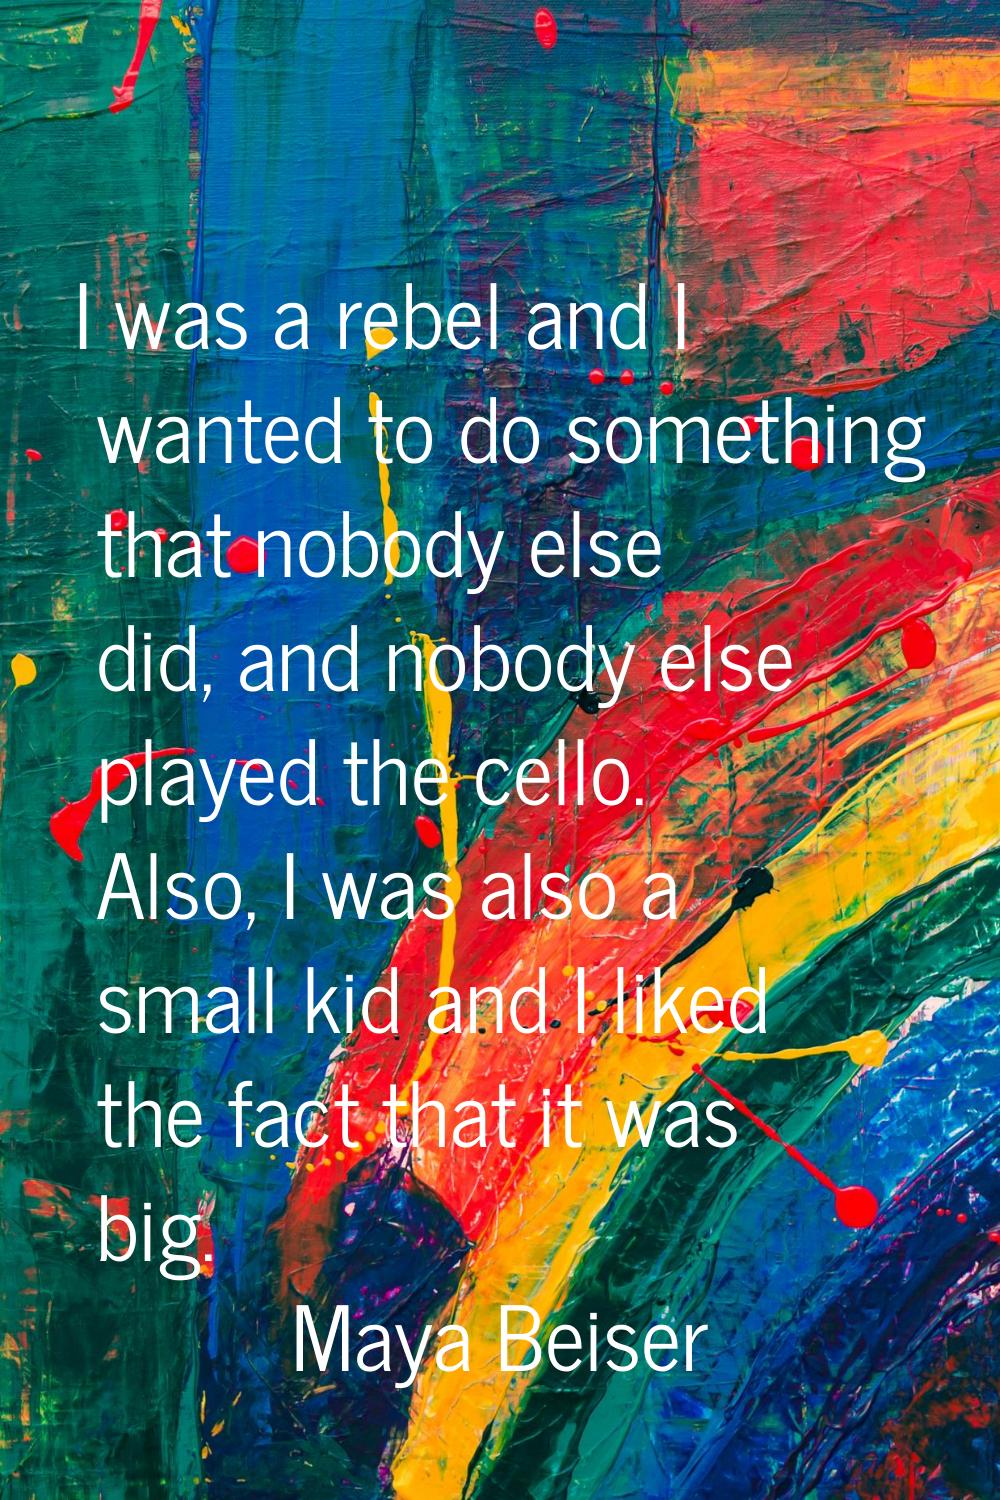 I was a rebel and I wanted to do something that nobody else did, and nobody else played the cello. 